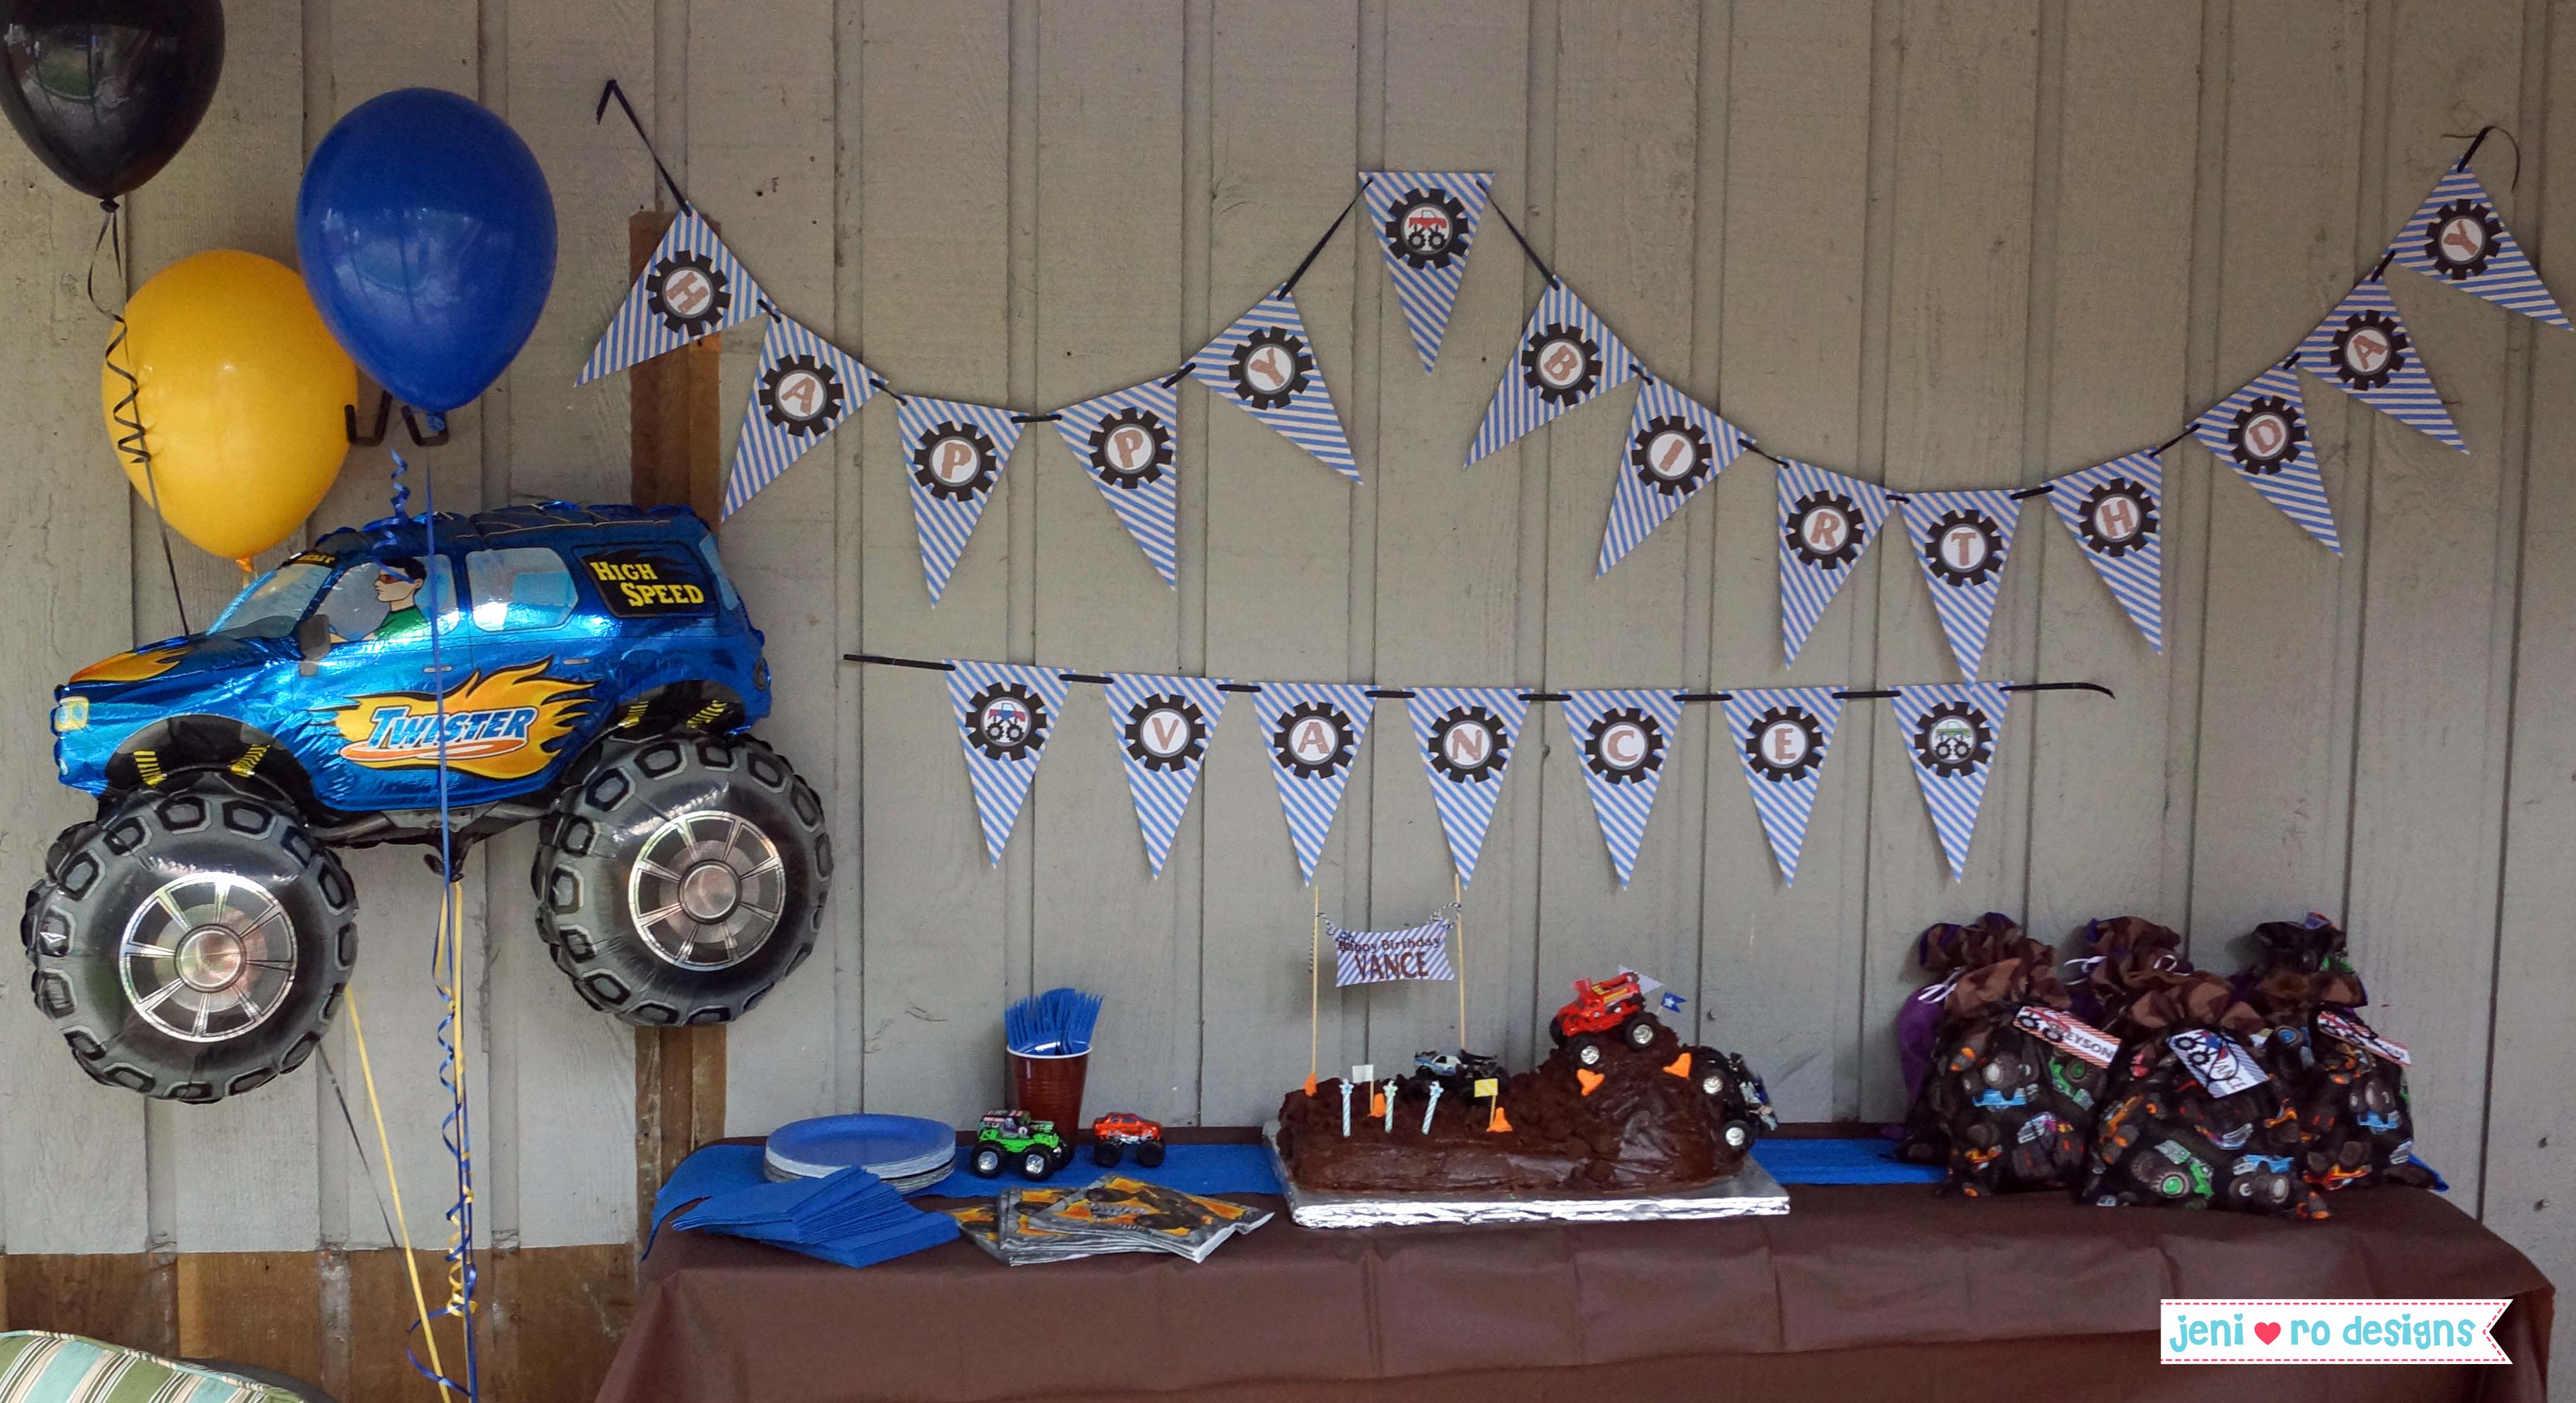 Mr. V's 3rd Monster Truck Birthday Party Part II - The Fun and